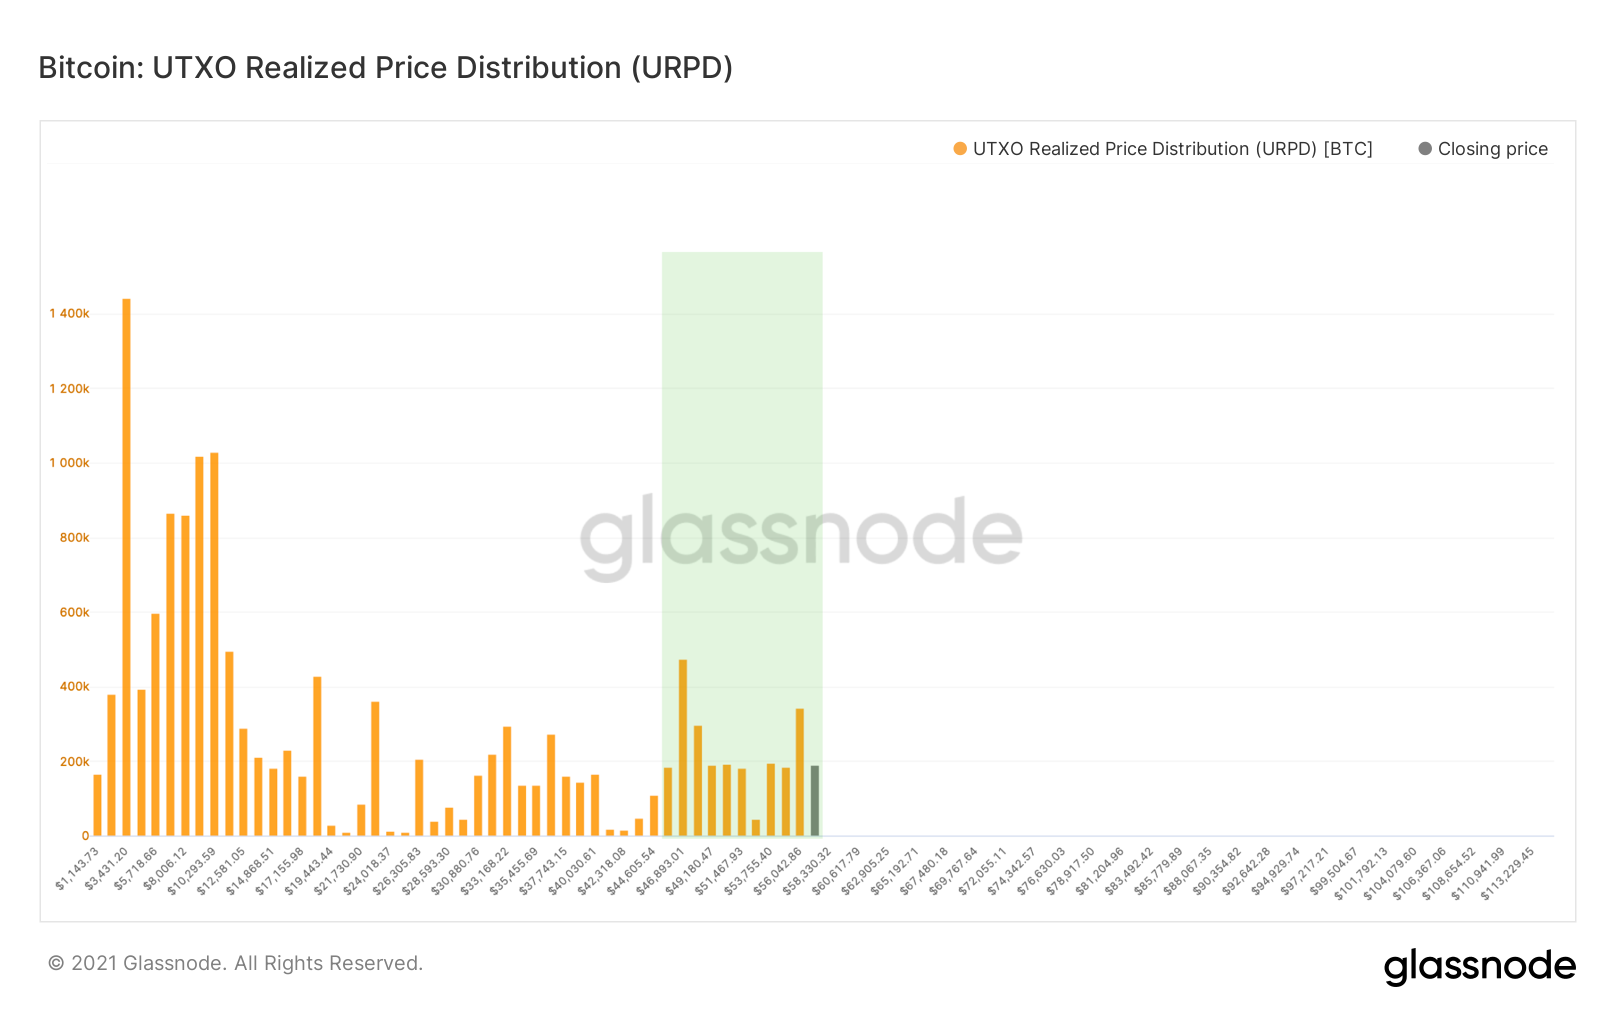 Bitcoin Realized Price Distribution by Glassnode